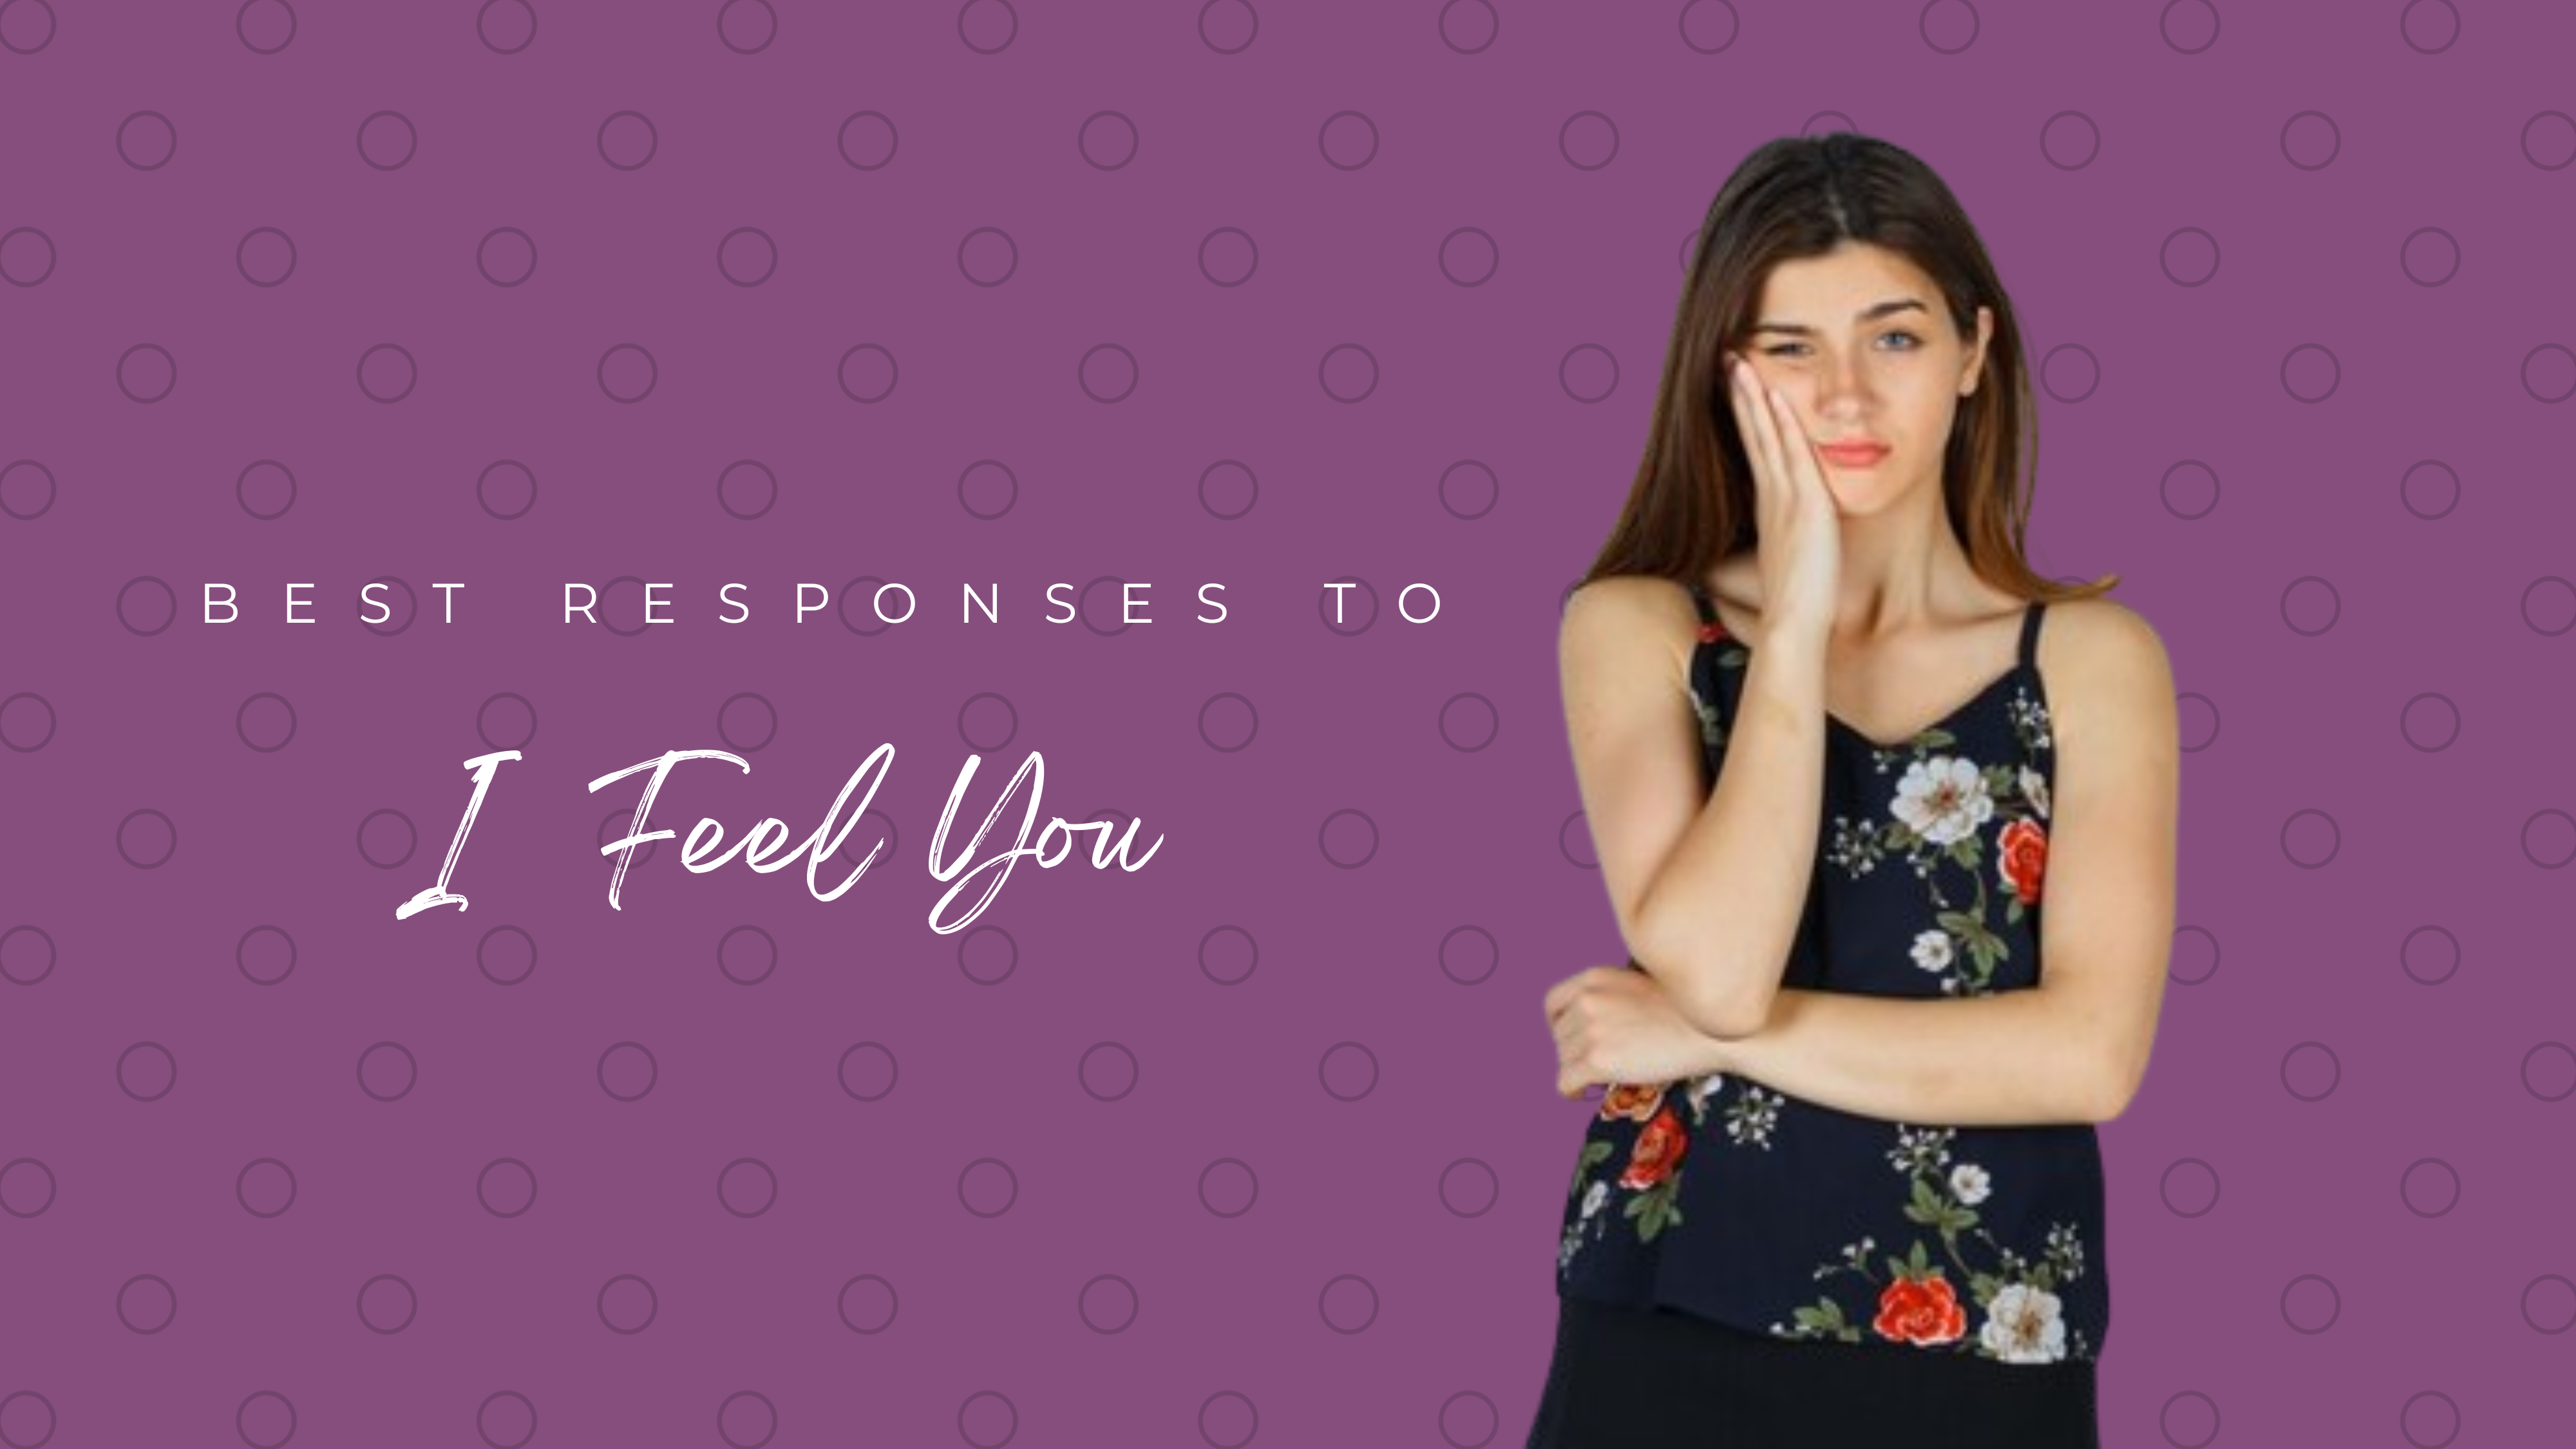 Best Responses To “I Feel You"